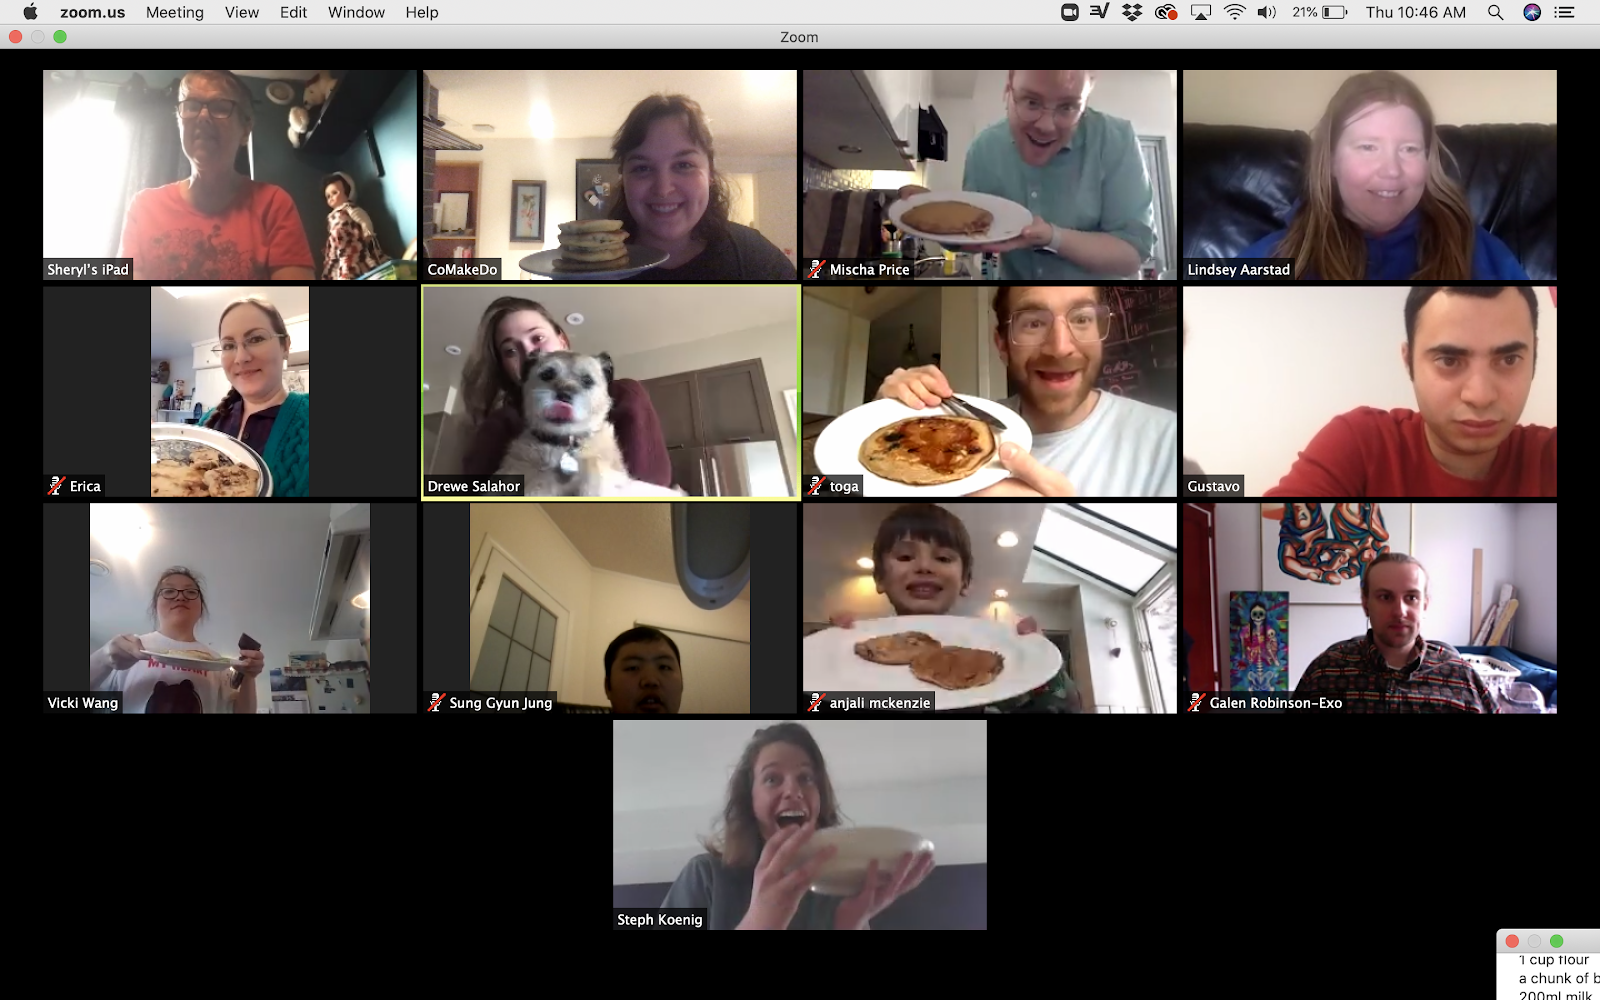 zoom video call participants are all holding pancakes